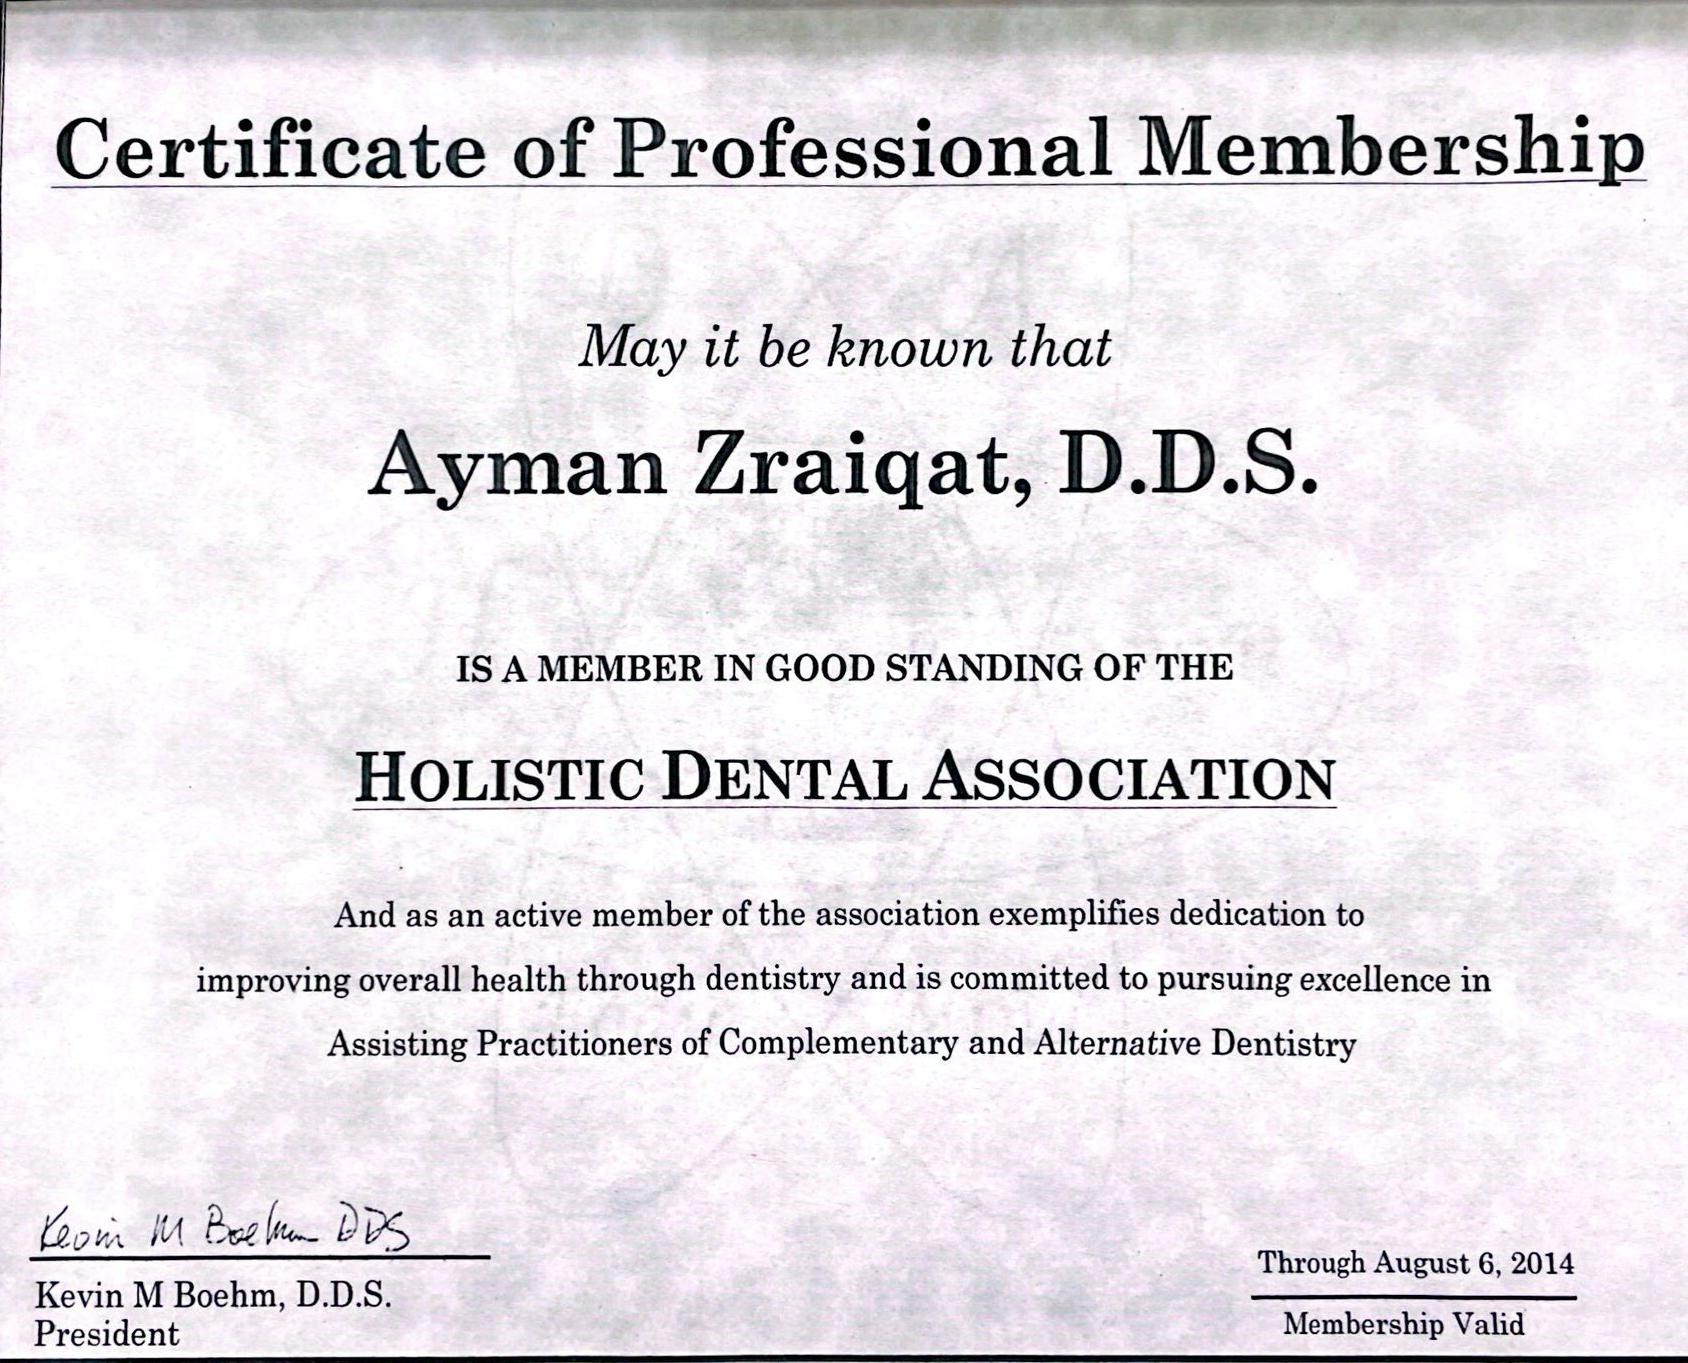 Certificate of Professional Membership for Ayman Zraiqat, D.D.S., in the Holistic Dental Association, valid through August 6, 2014.